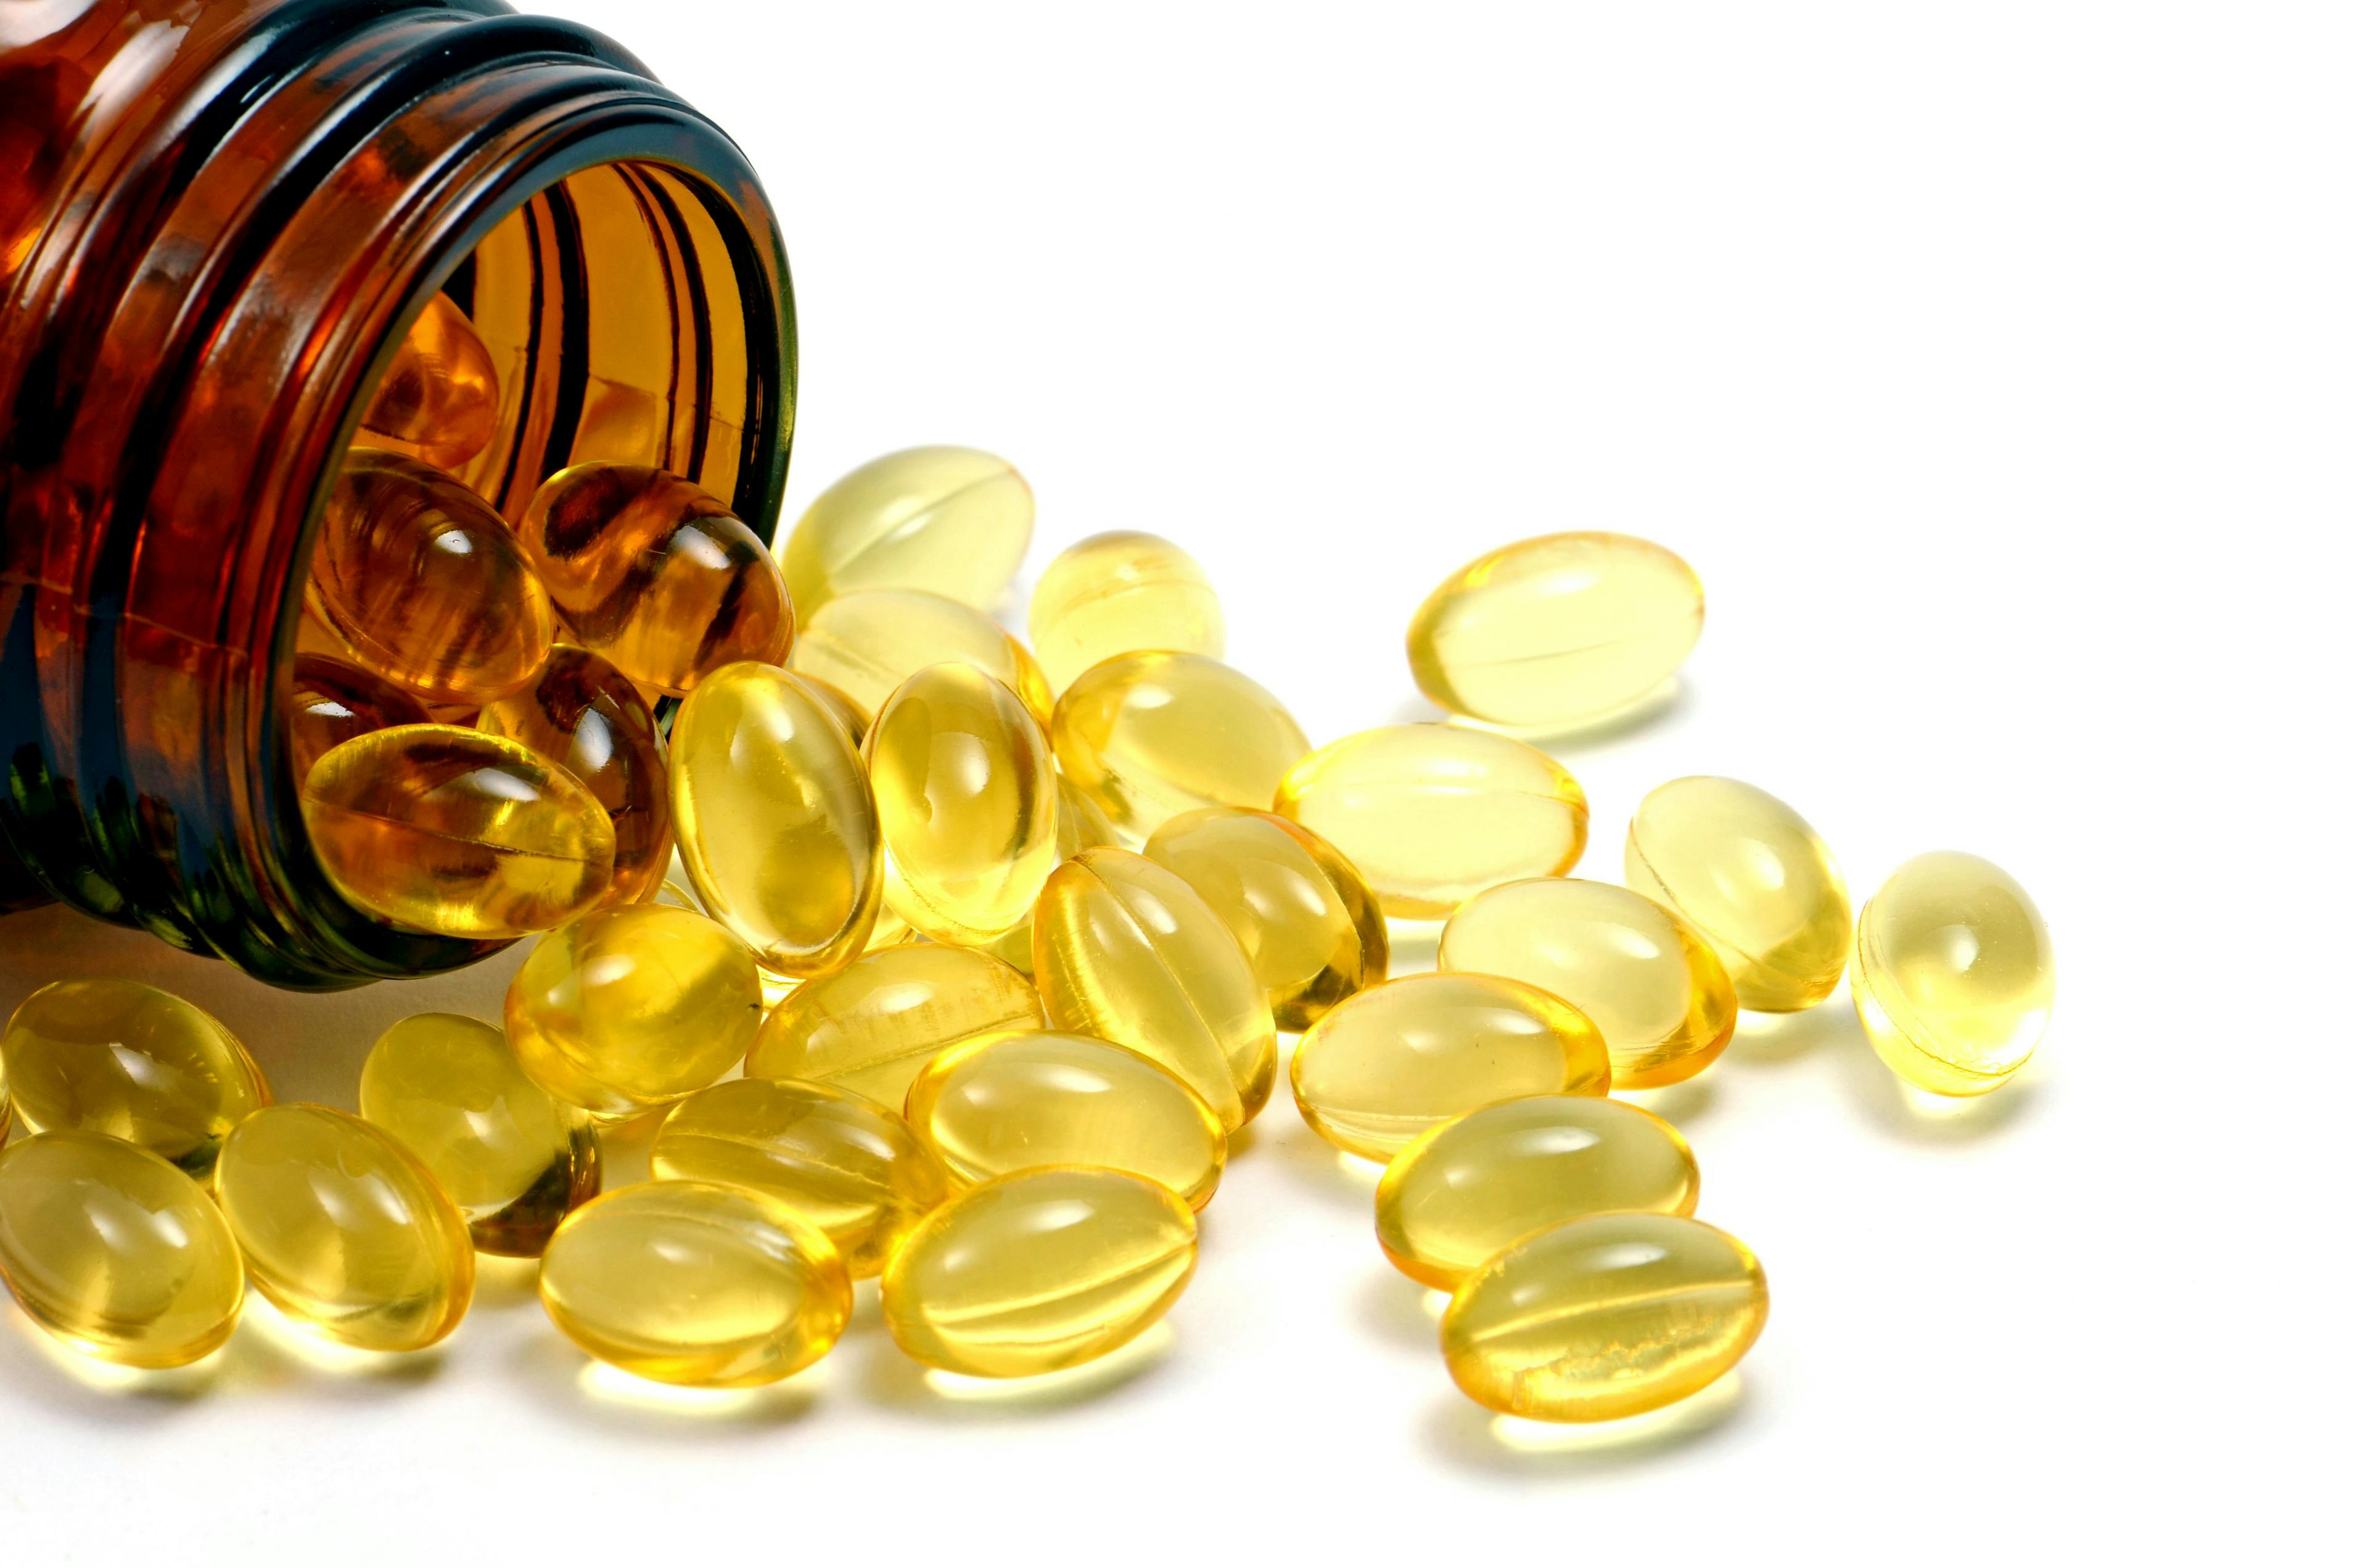 Study Finds Habitual Fish Oil Use Linked to Cardiovascular Benefits